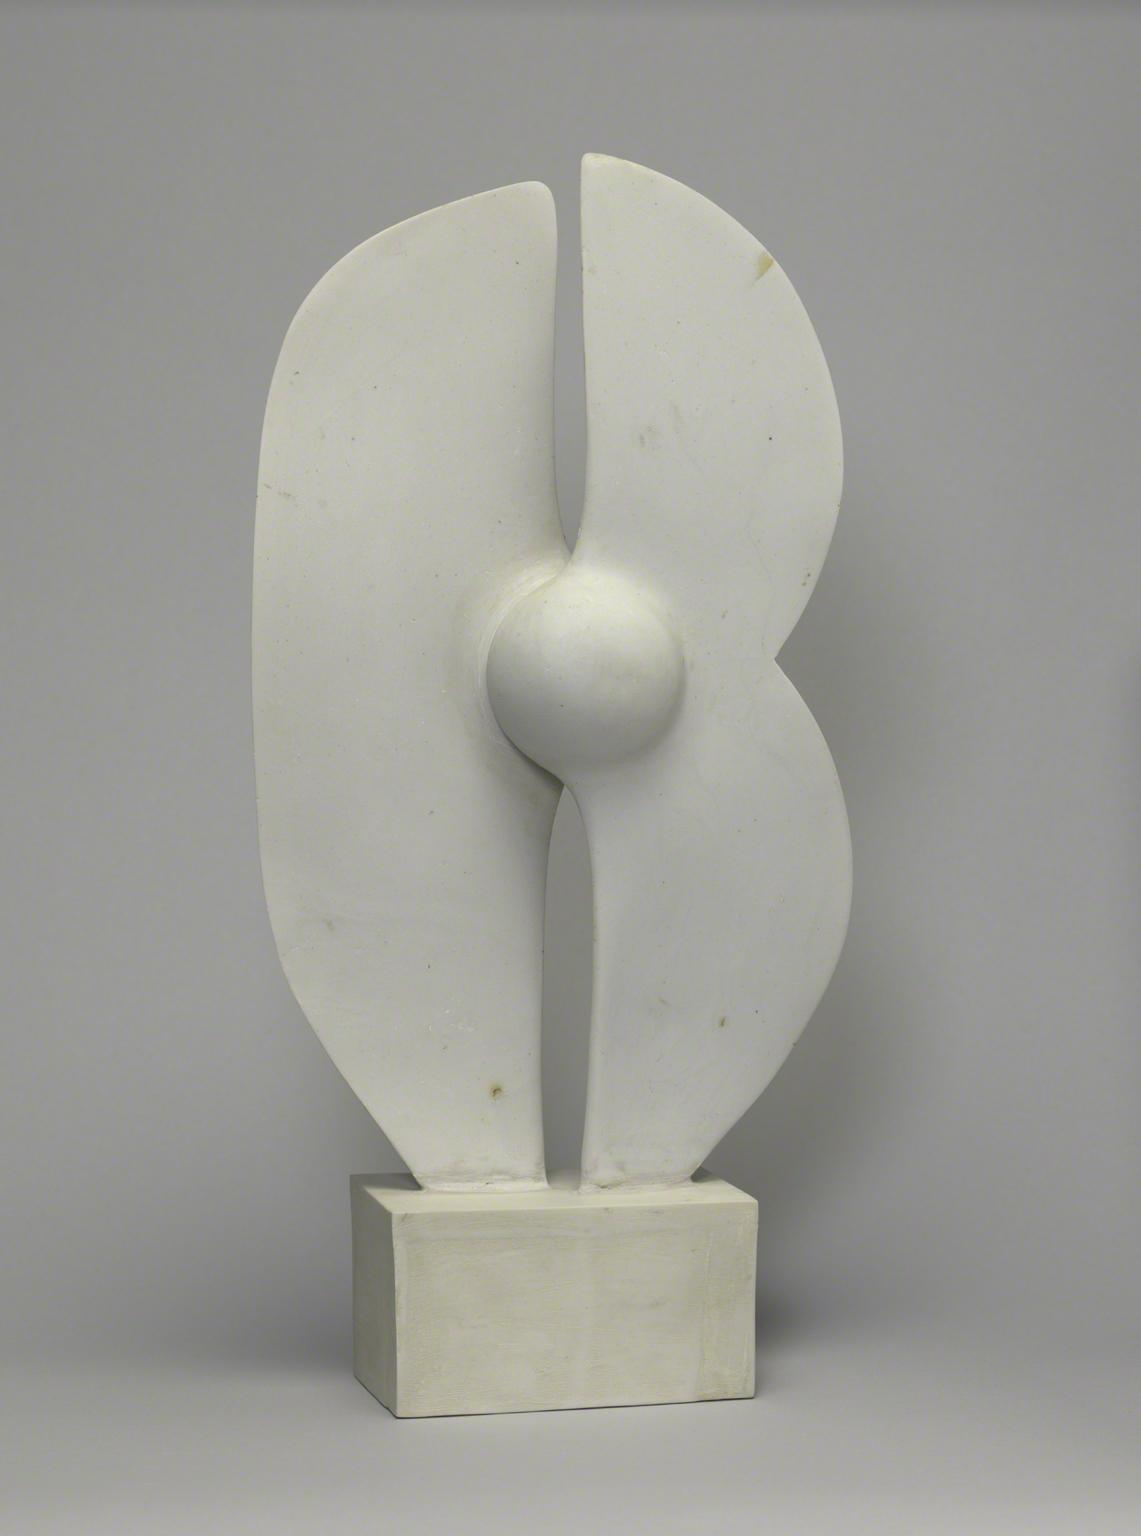 White, porcelain sculpture with two blades attached by central sphere. 